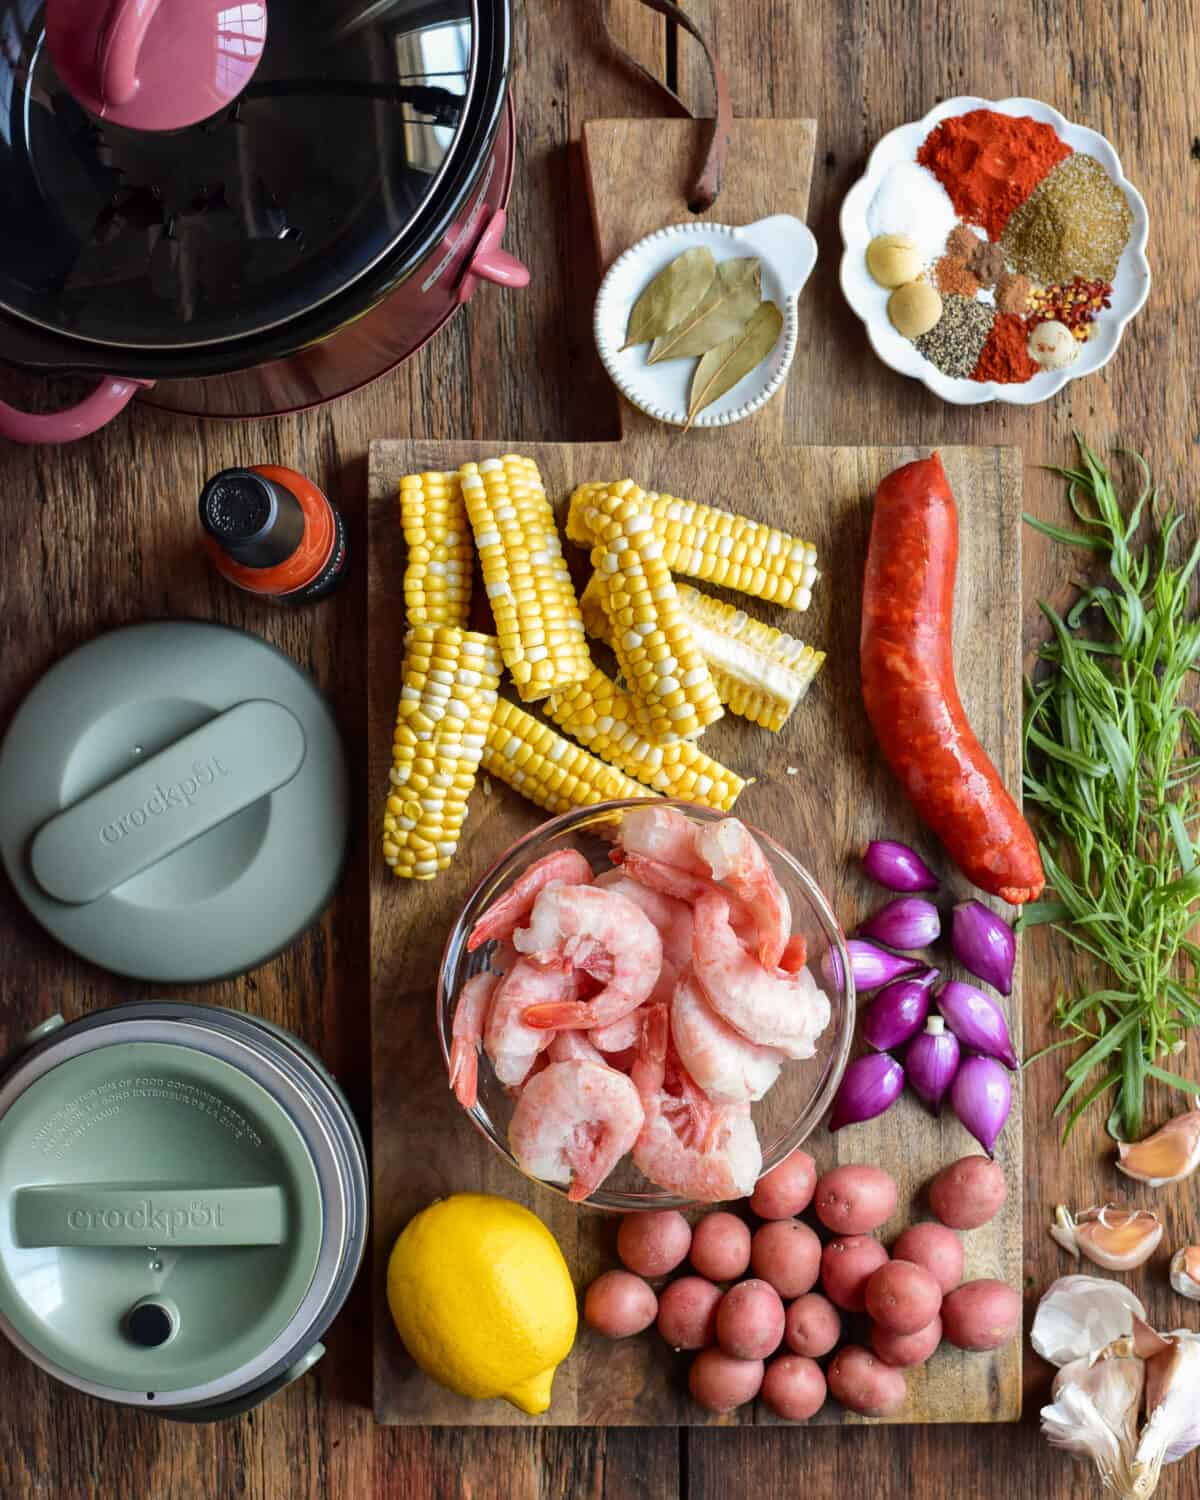 Ingredients for a shrimp boil are laid out beside two crockpots.